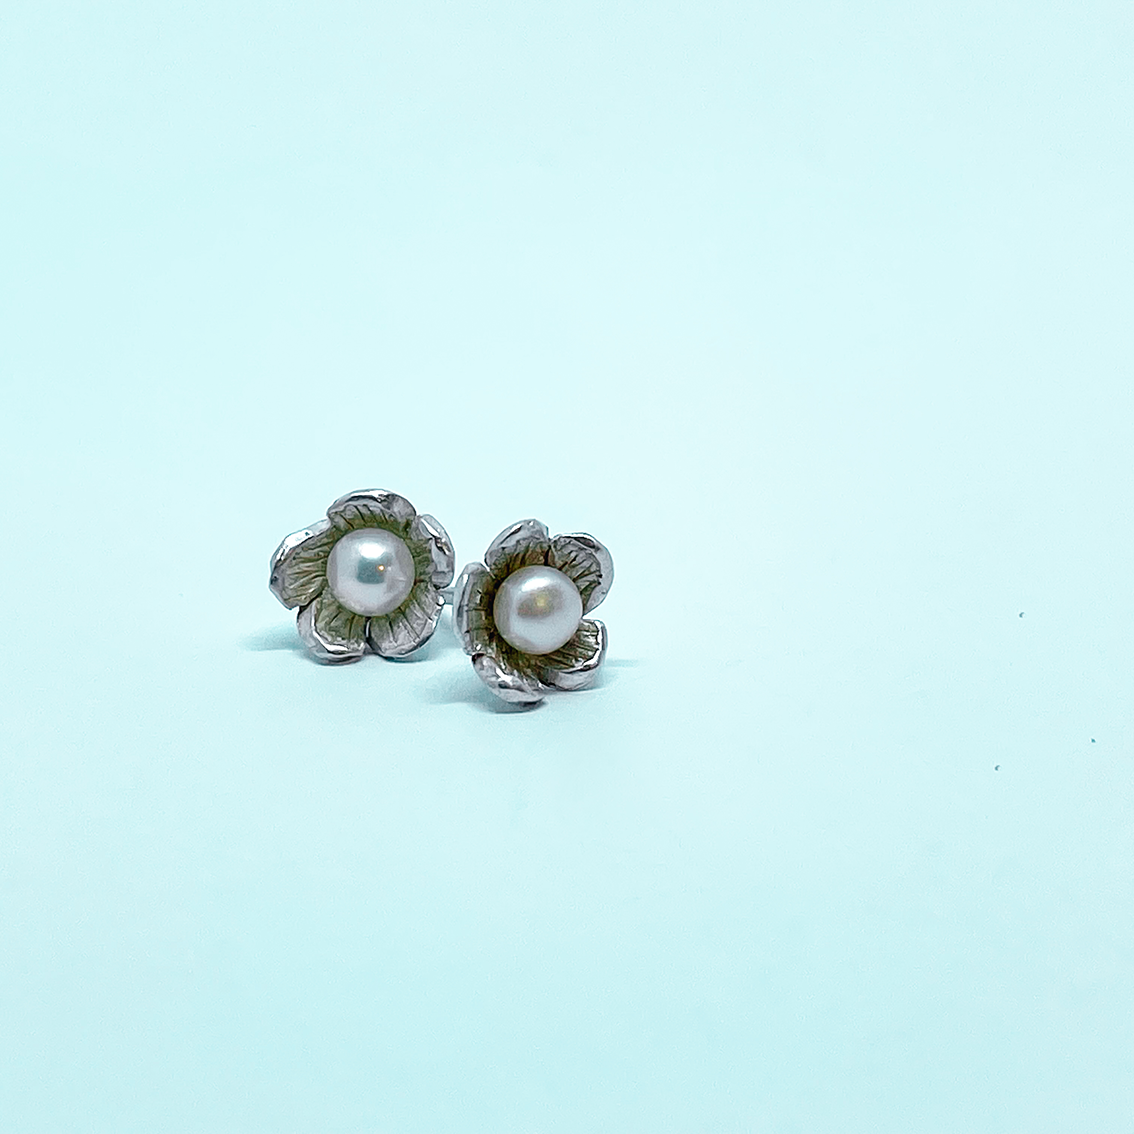 A close up of a pair of small flower Stud Earrings in Sterling Silver set with a white freshwater pearl